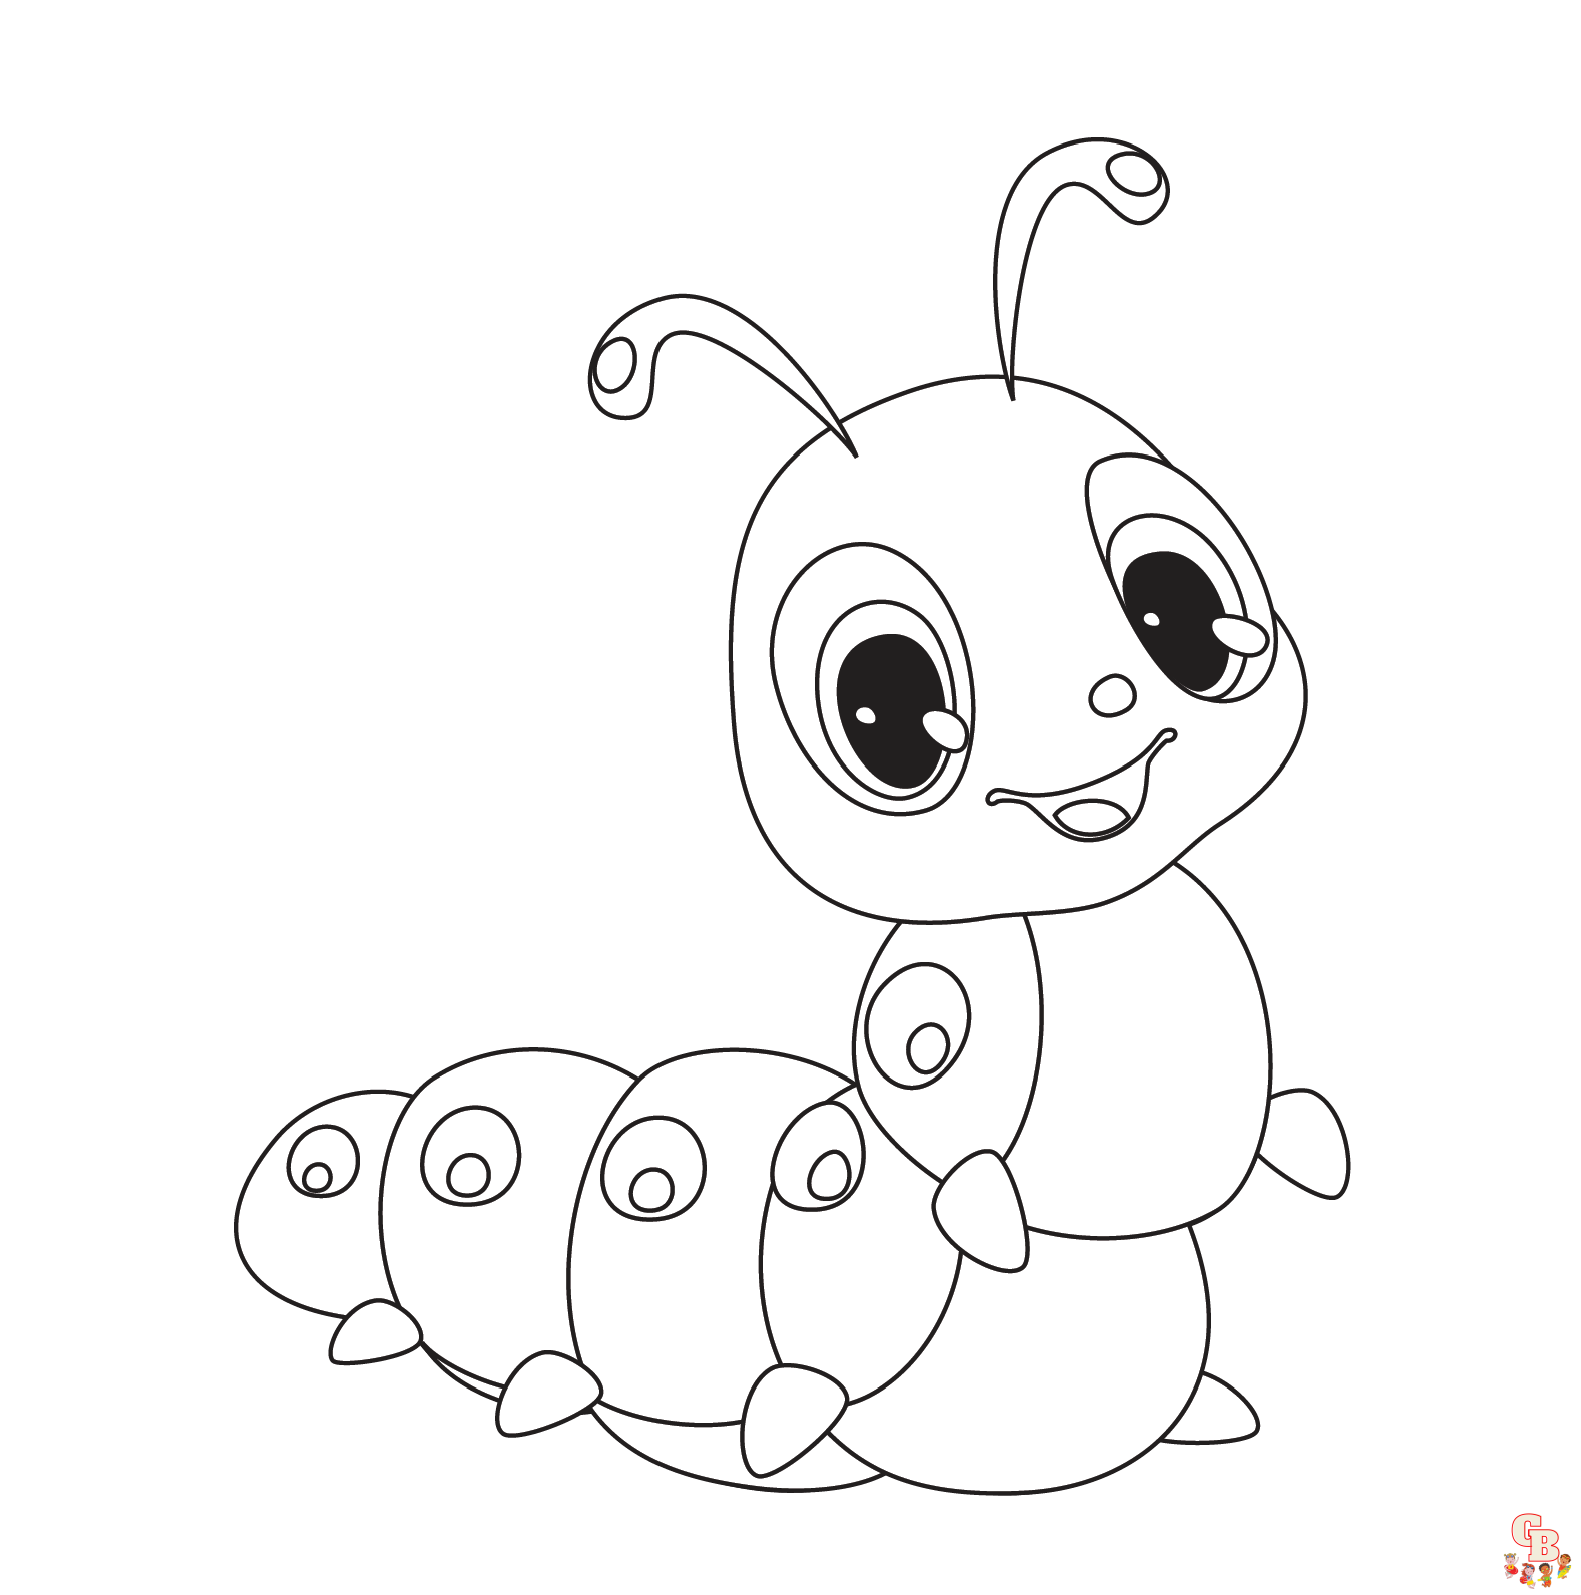 Caterpillar Coloring Pages 6